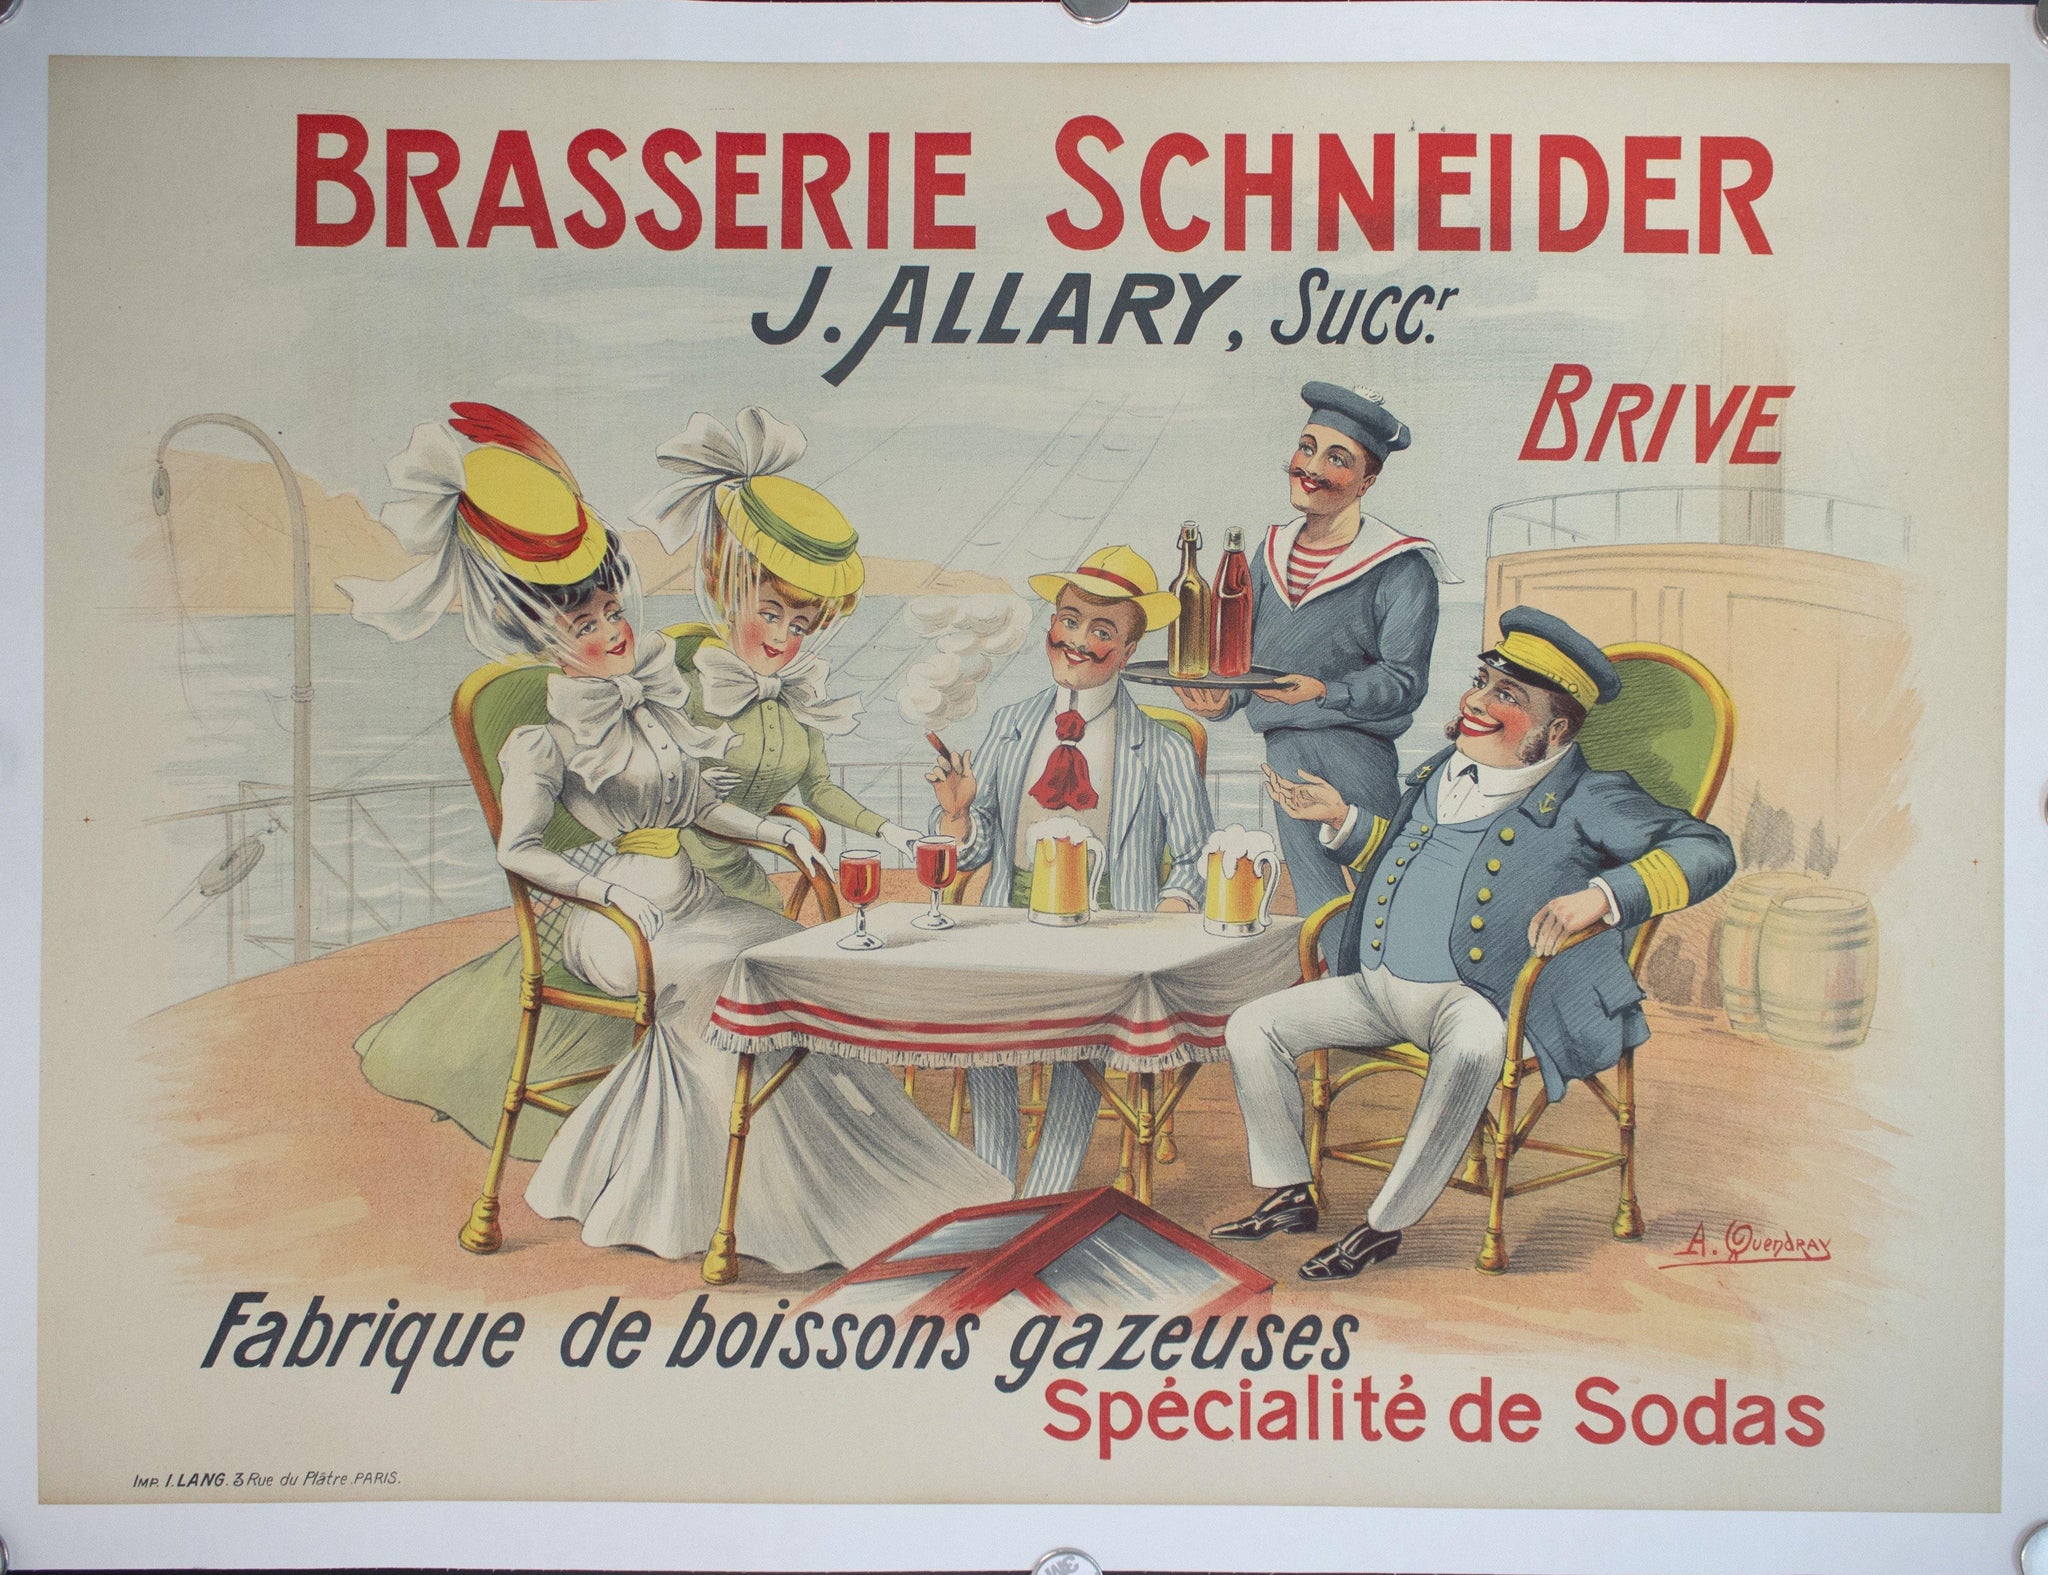 c. 1900 Brasserie Schneider by A. Quendray - Golden Age Posters